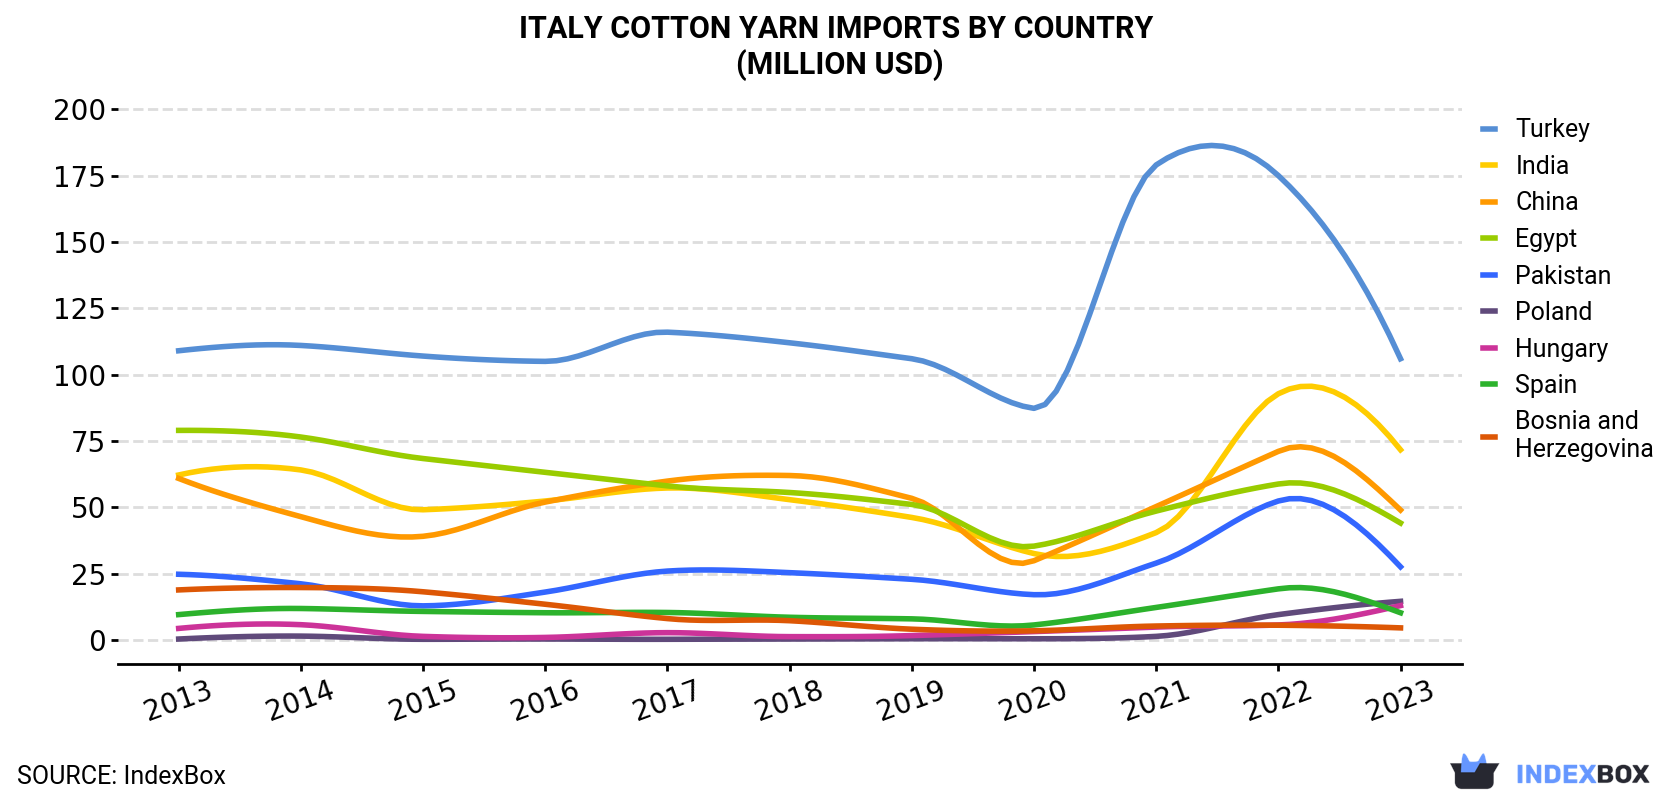 Italy Cotton Yarn Imports By Country (Million USD)